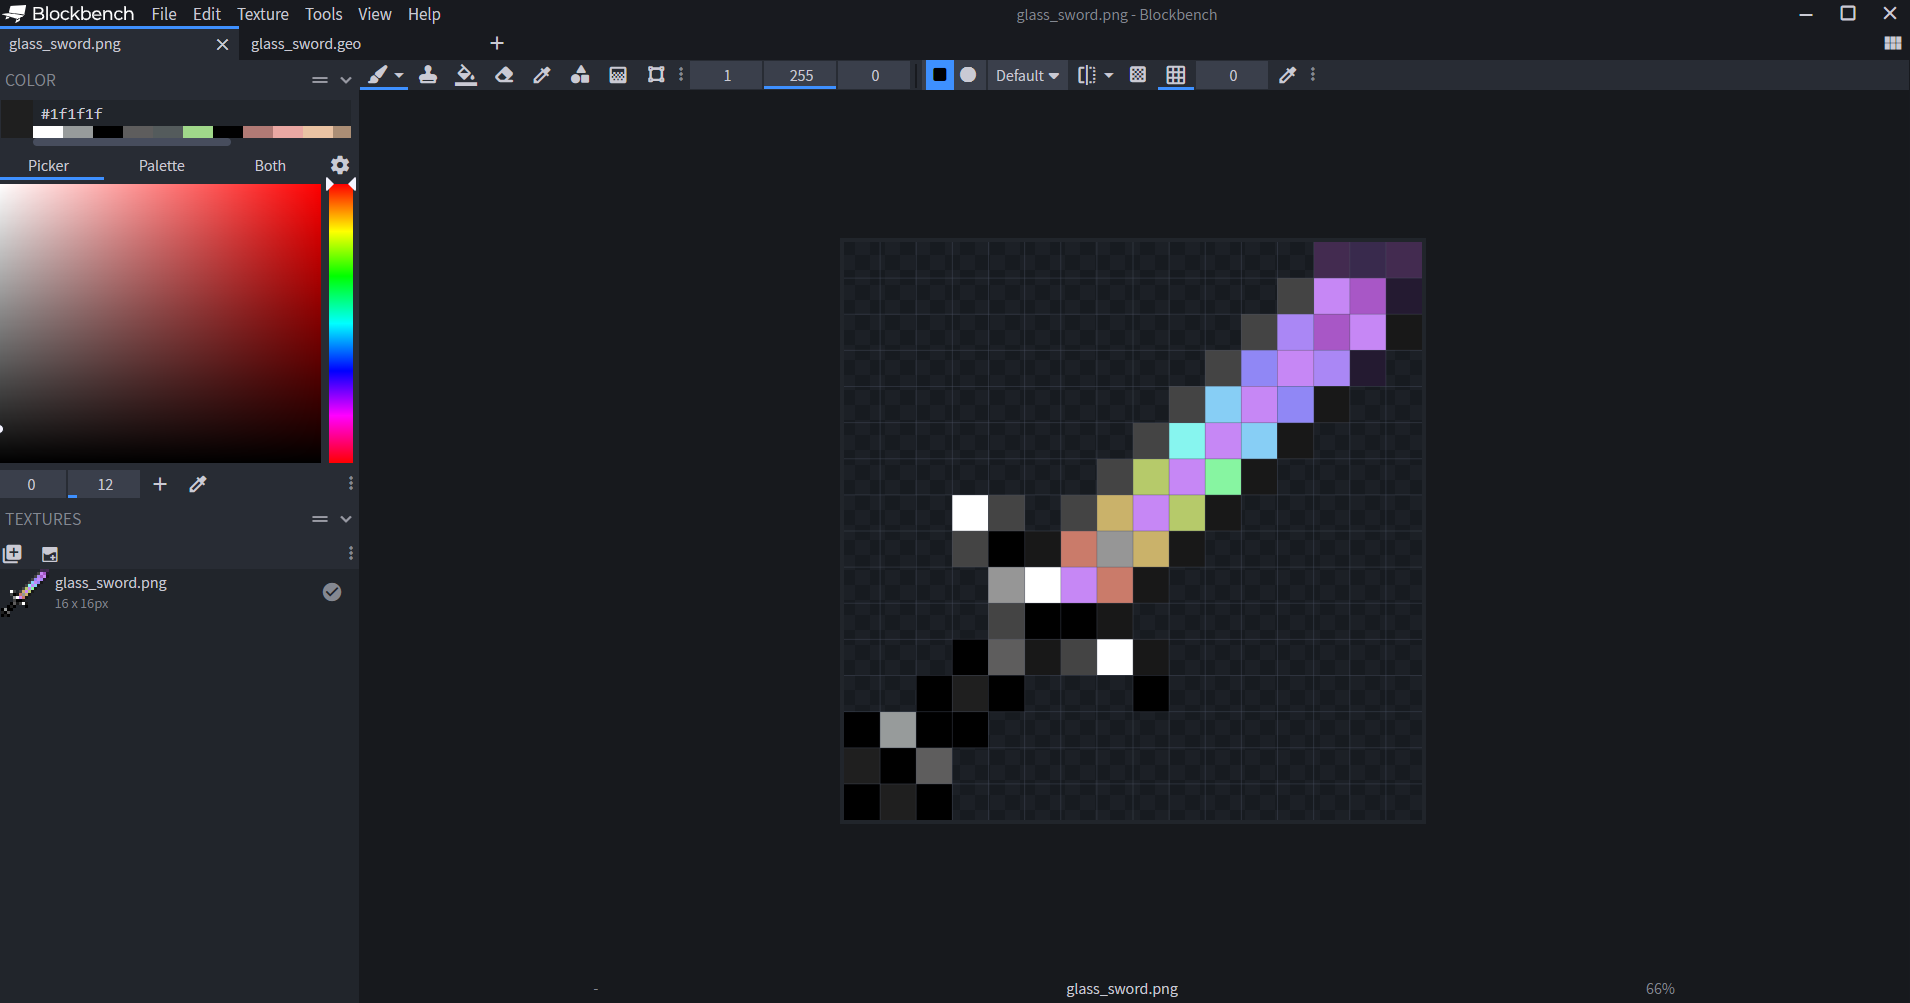 Image of a sword icon edited to look like a rainbow prism.